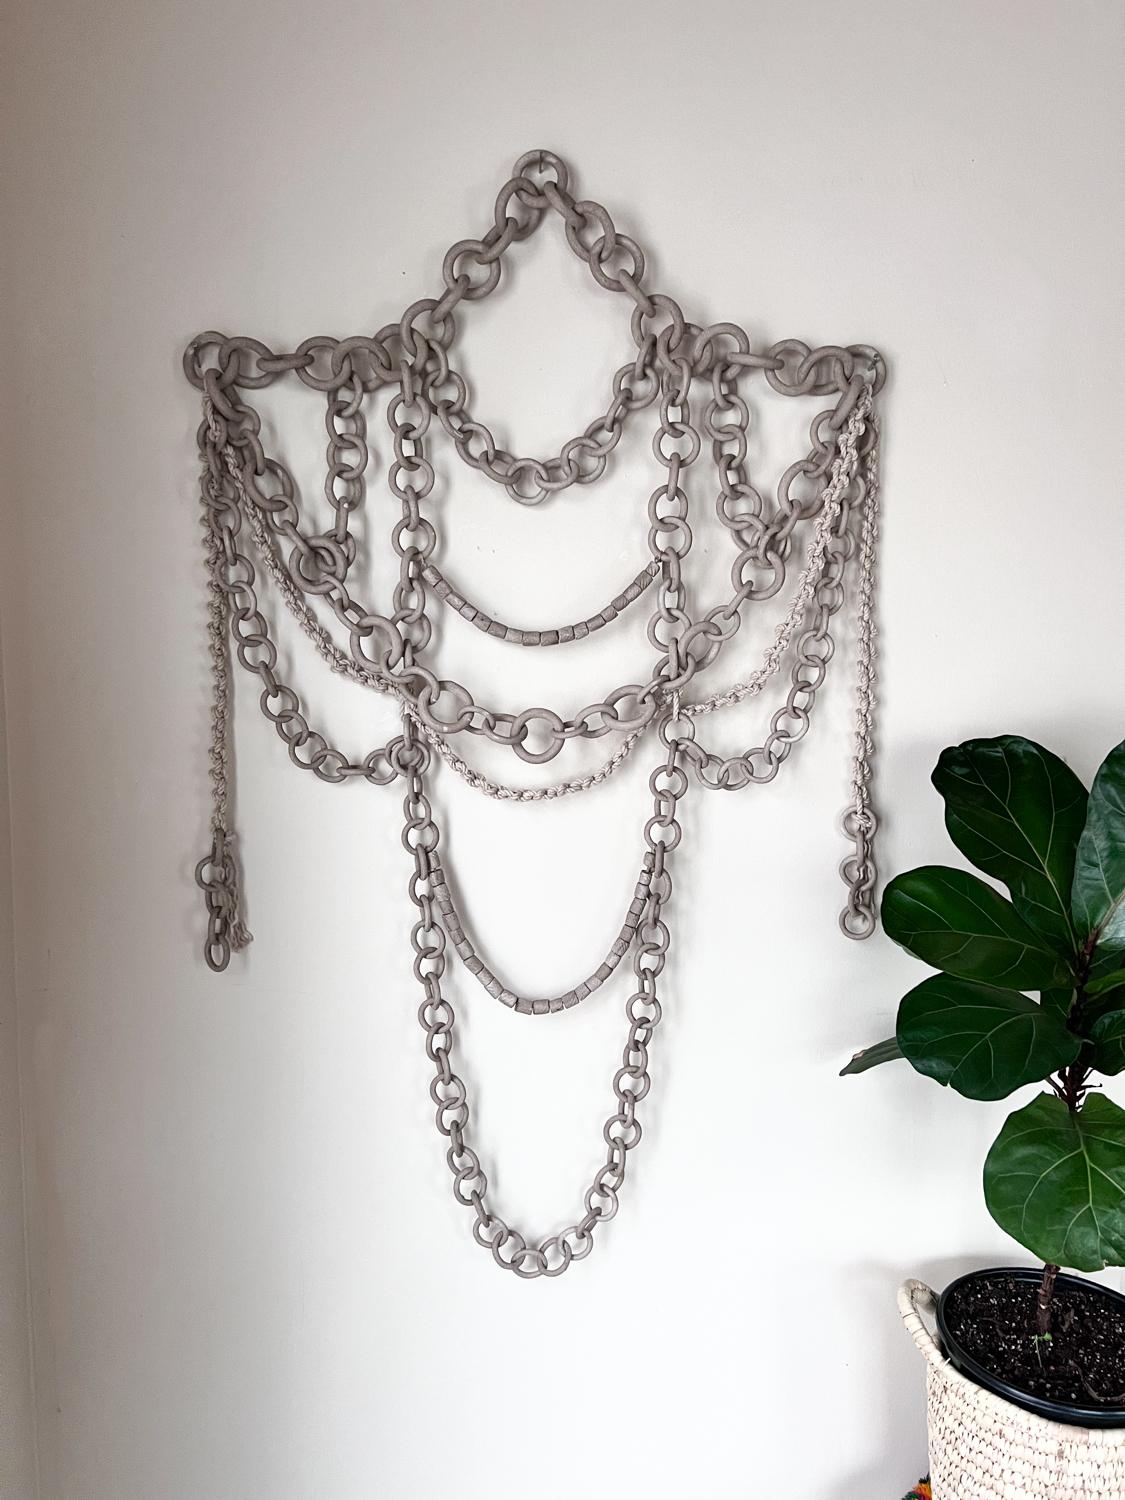 Hand-Crafted Ceramic Link Chain Wall Sculpture For Sale